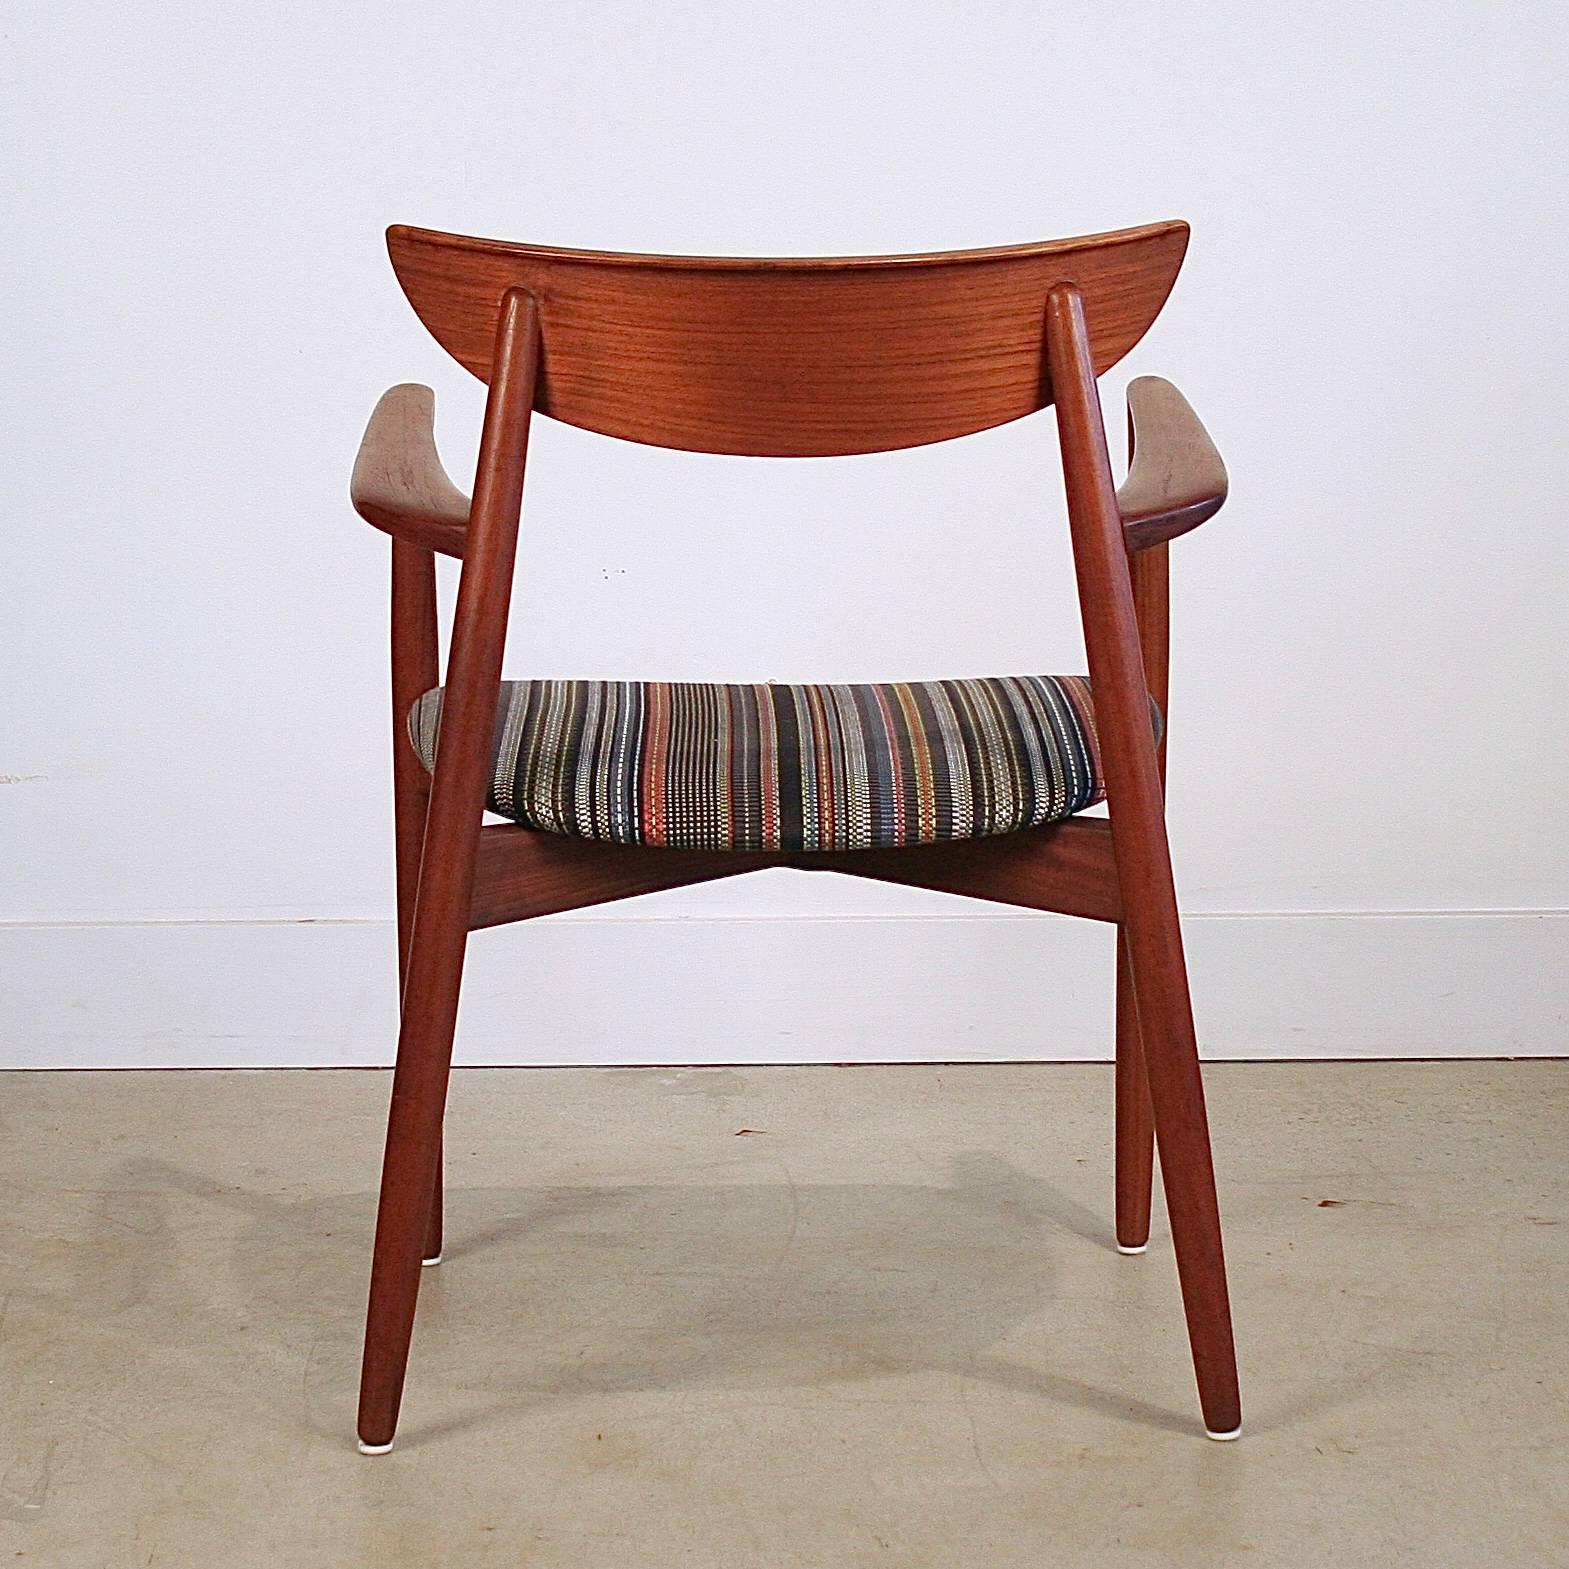 Vintage Danish Teak Carver Armchair In Excellent Condition For Sale In Vancouver, BC